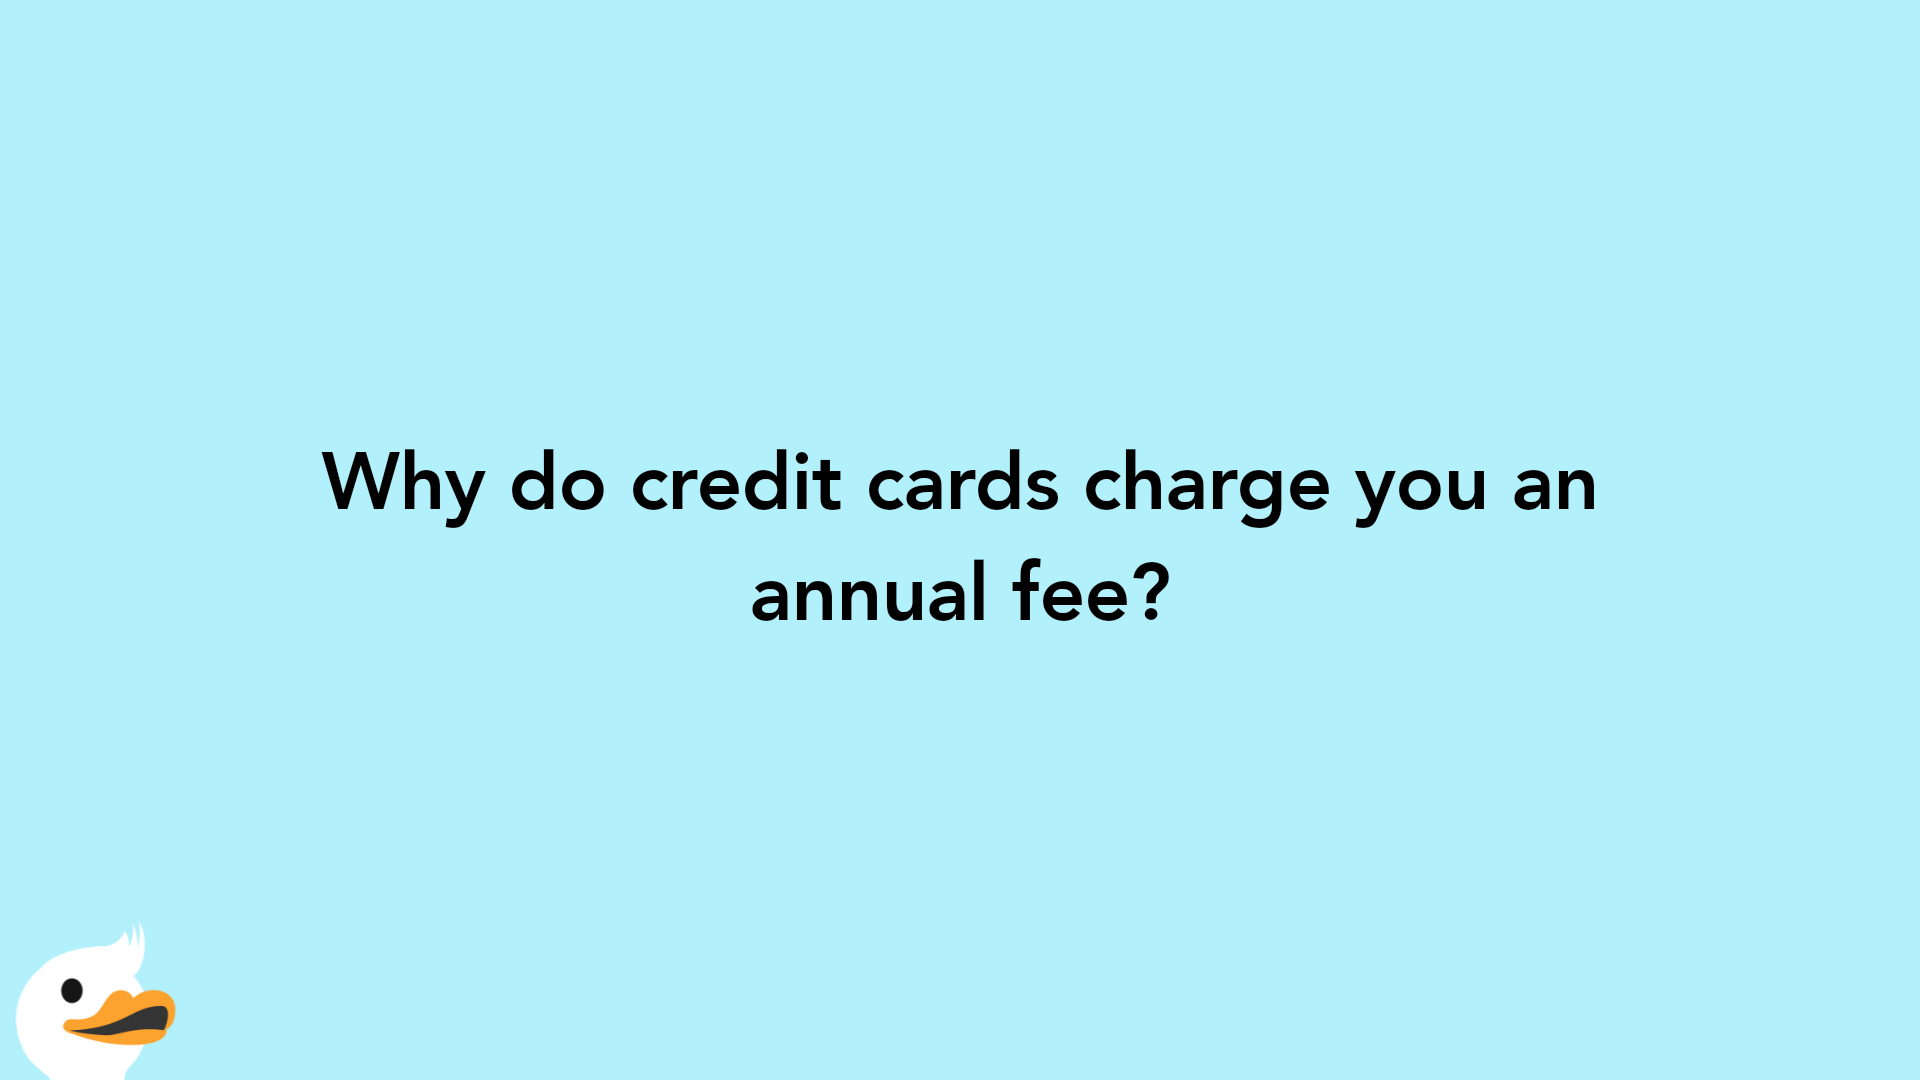 Why do credit cards charge you an annual fee?